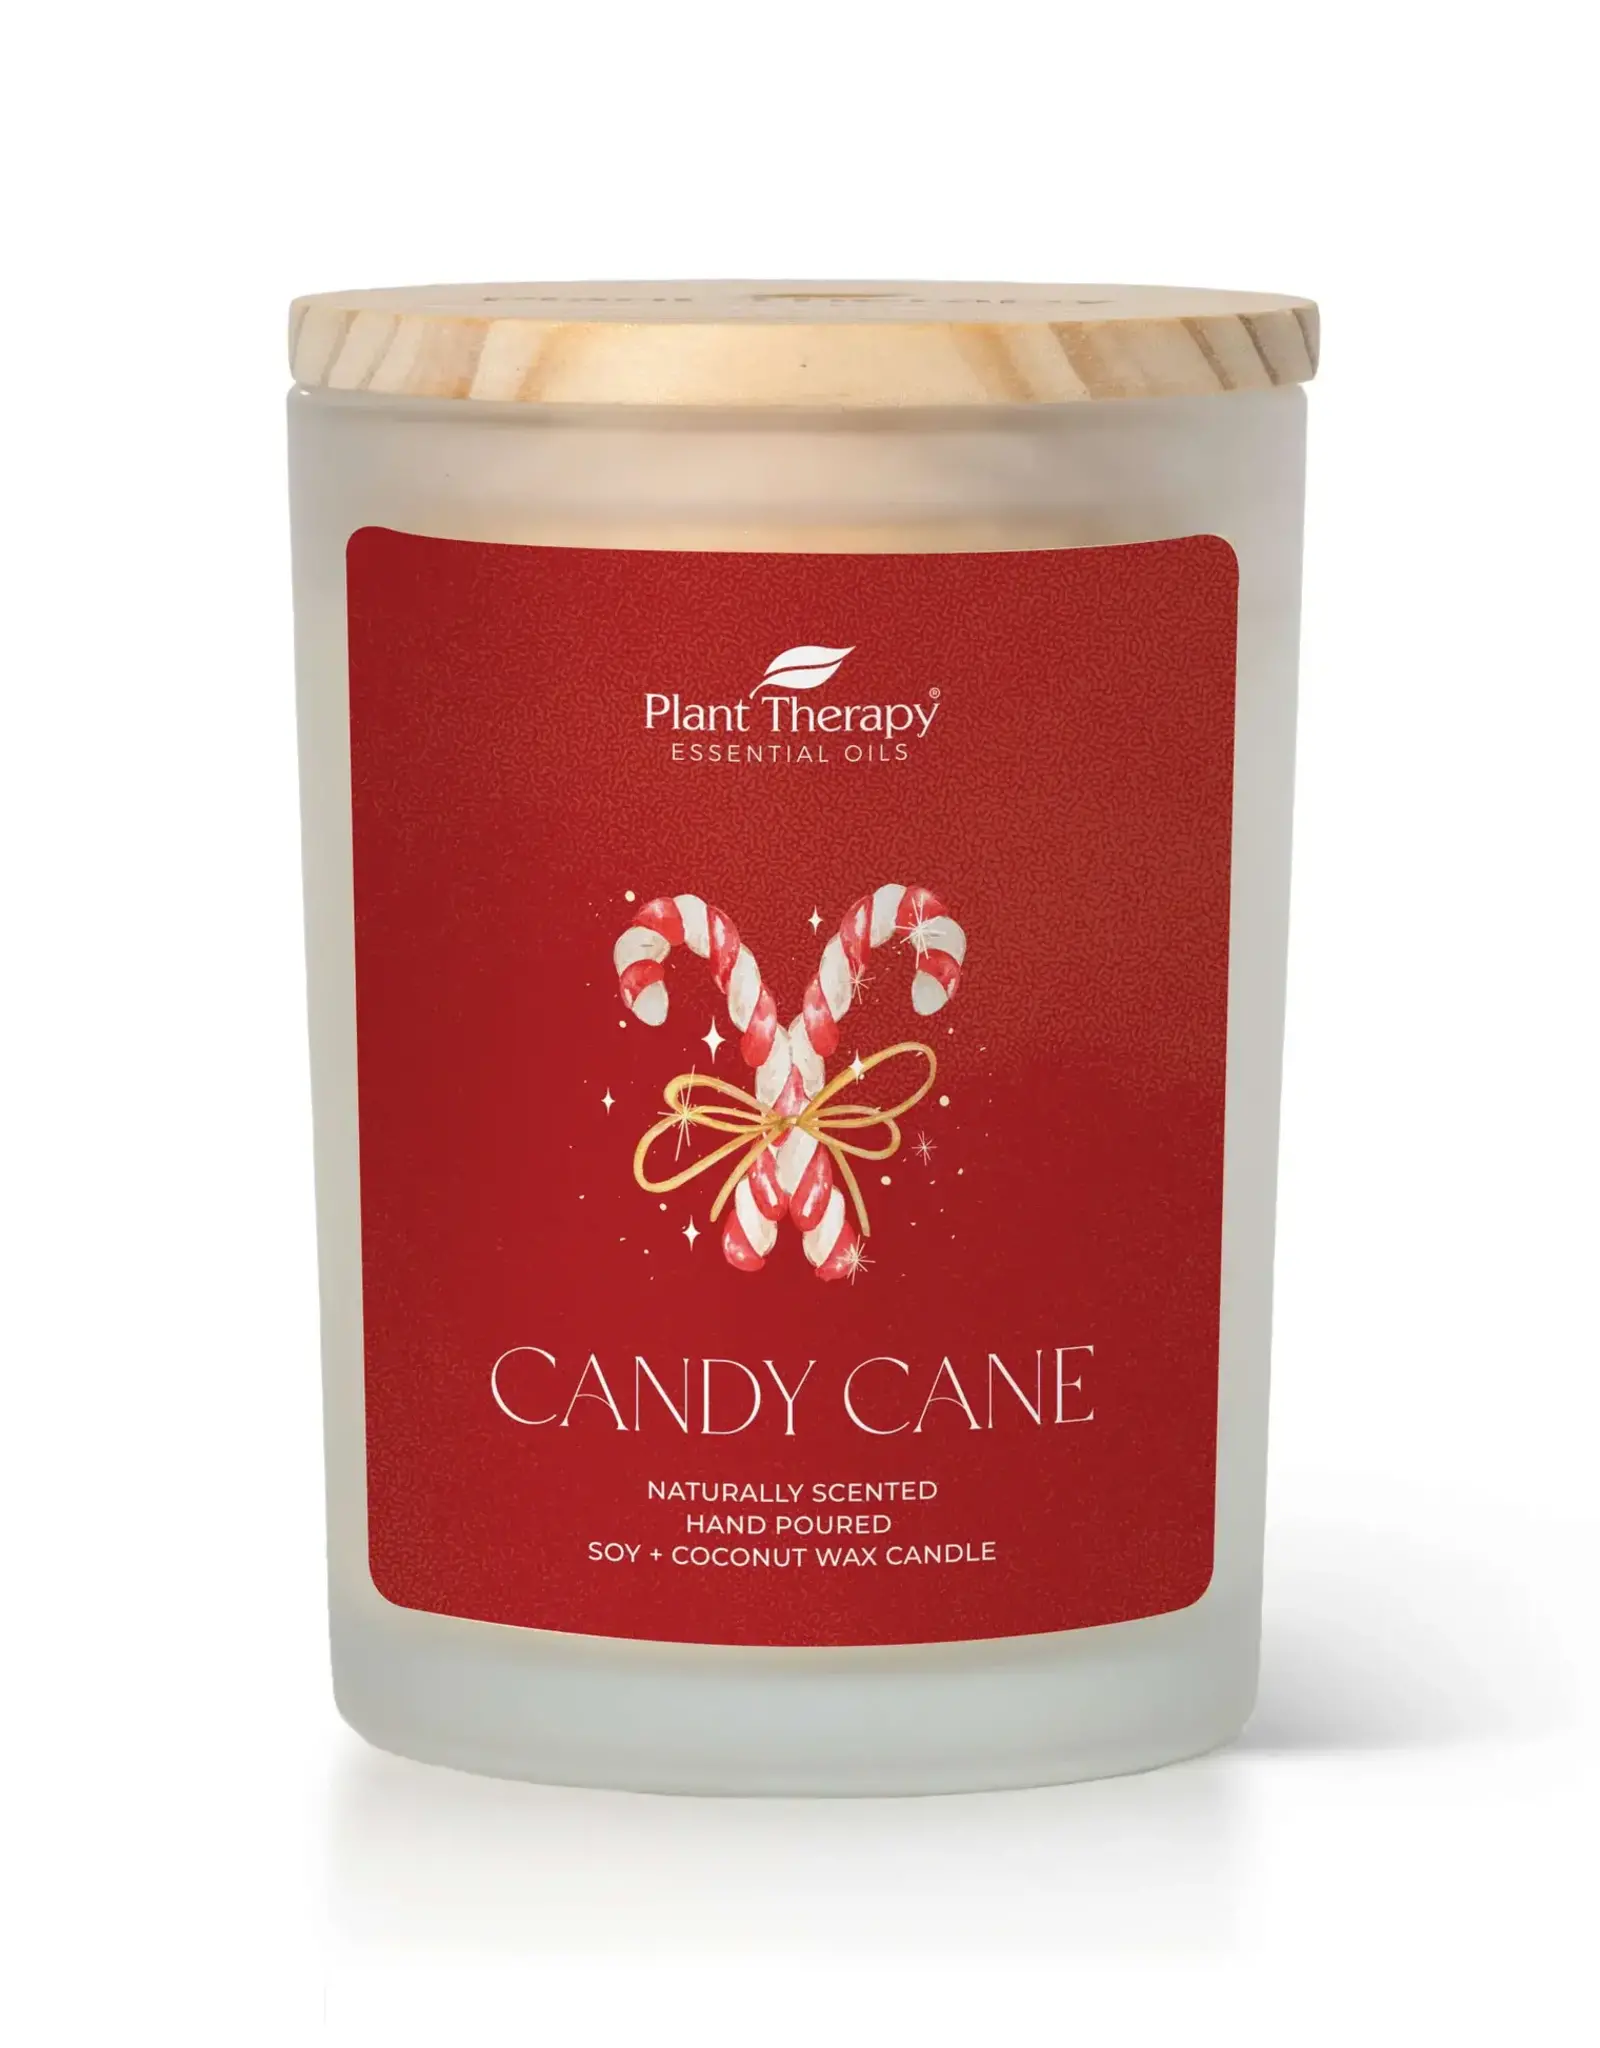 Plant Therapy Candy Cane Naturally Scented Candle